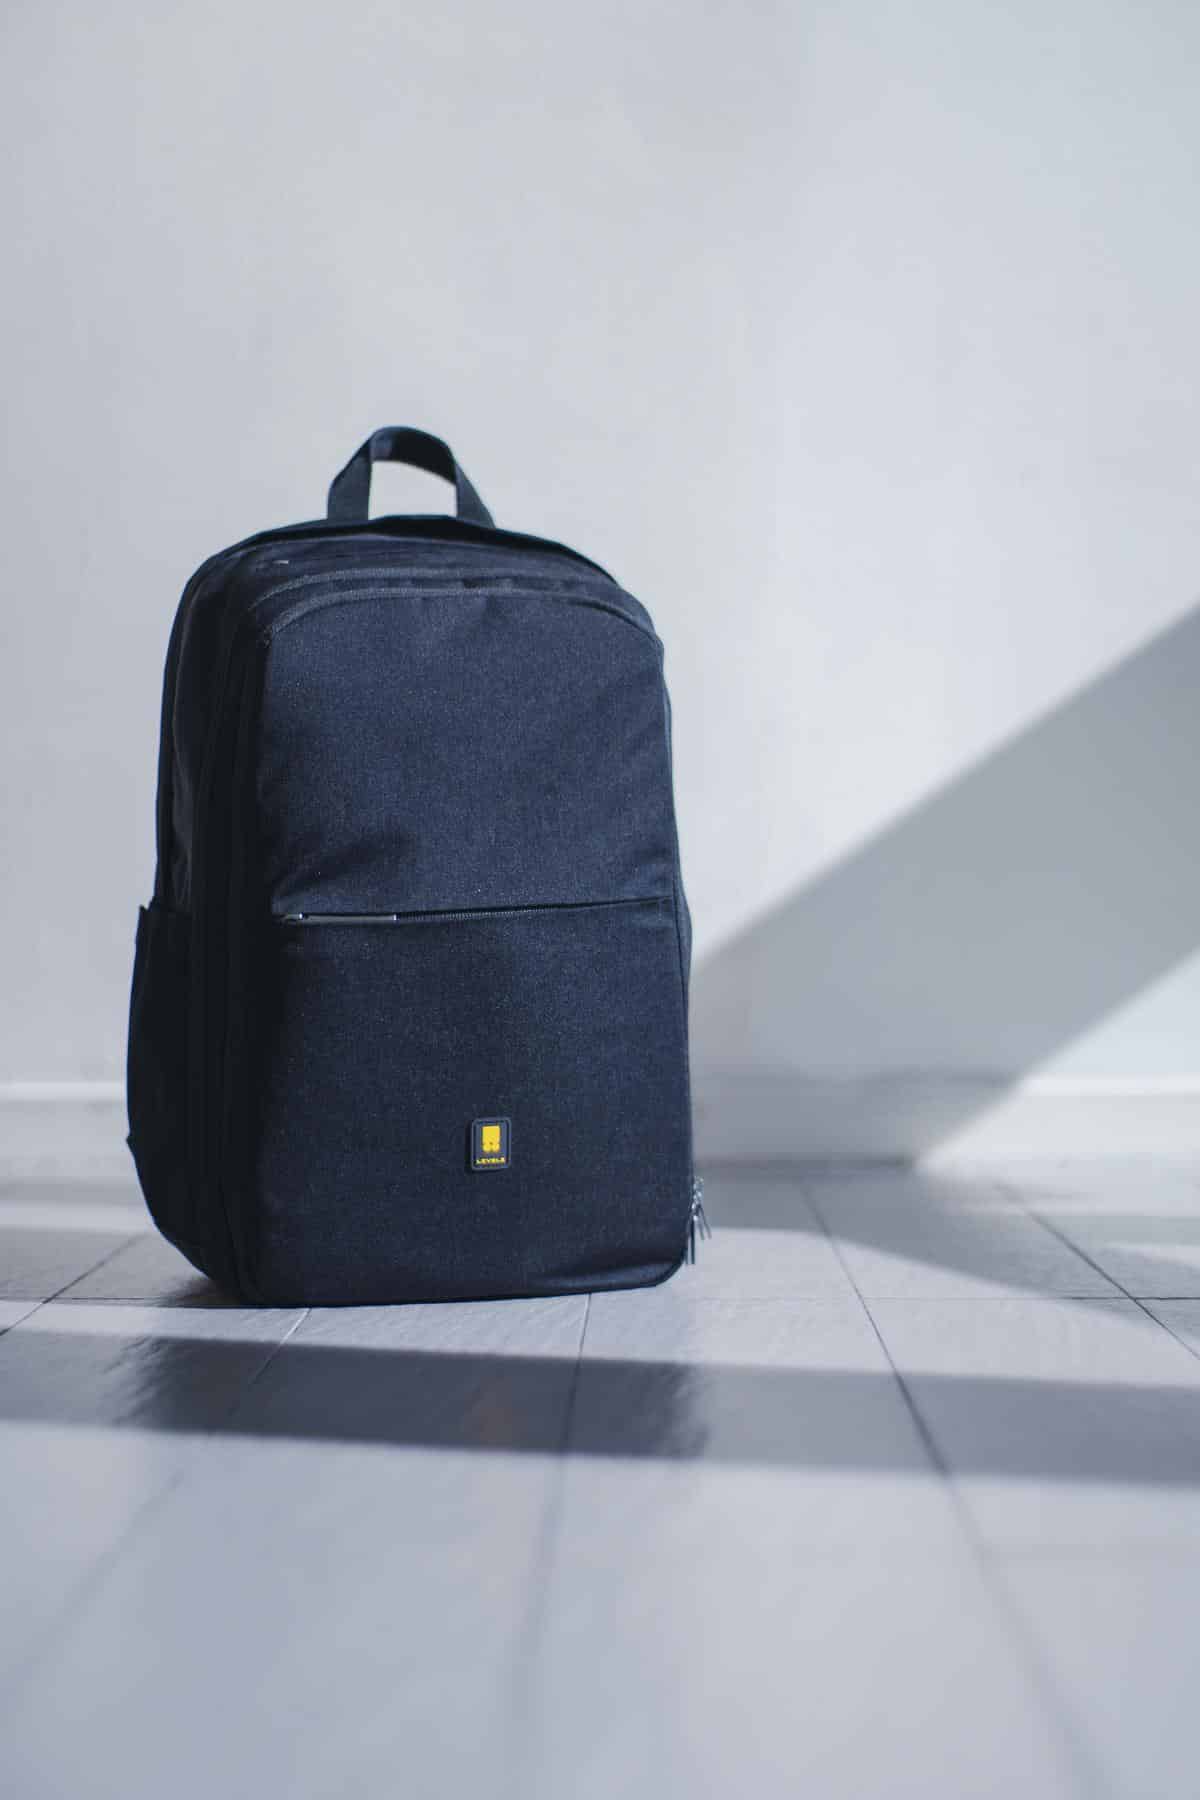 Image of a Halo Infinite backpack with cushioned laptop sleeve, integrated USB charging port, reflective elements, hydration bladder compartment, and ergonomic design, representing its innovative features and style.